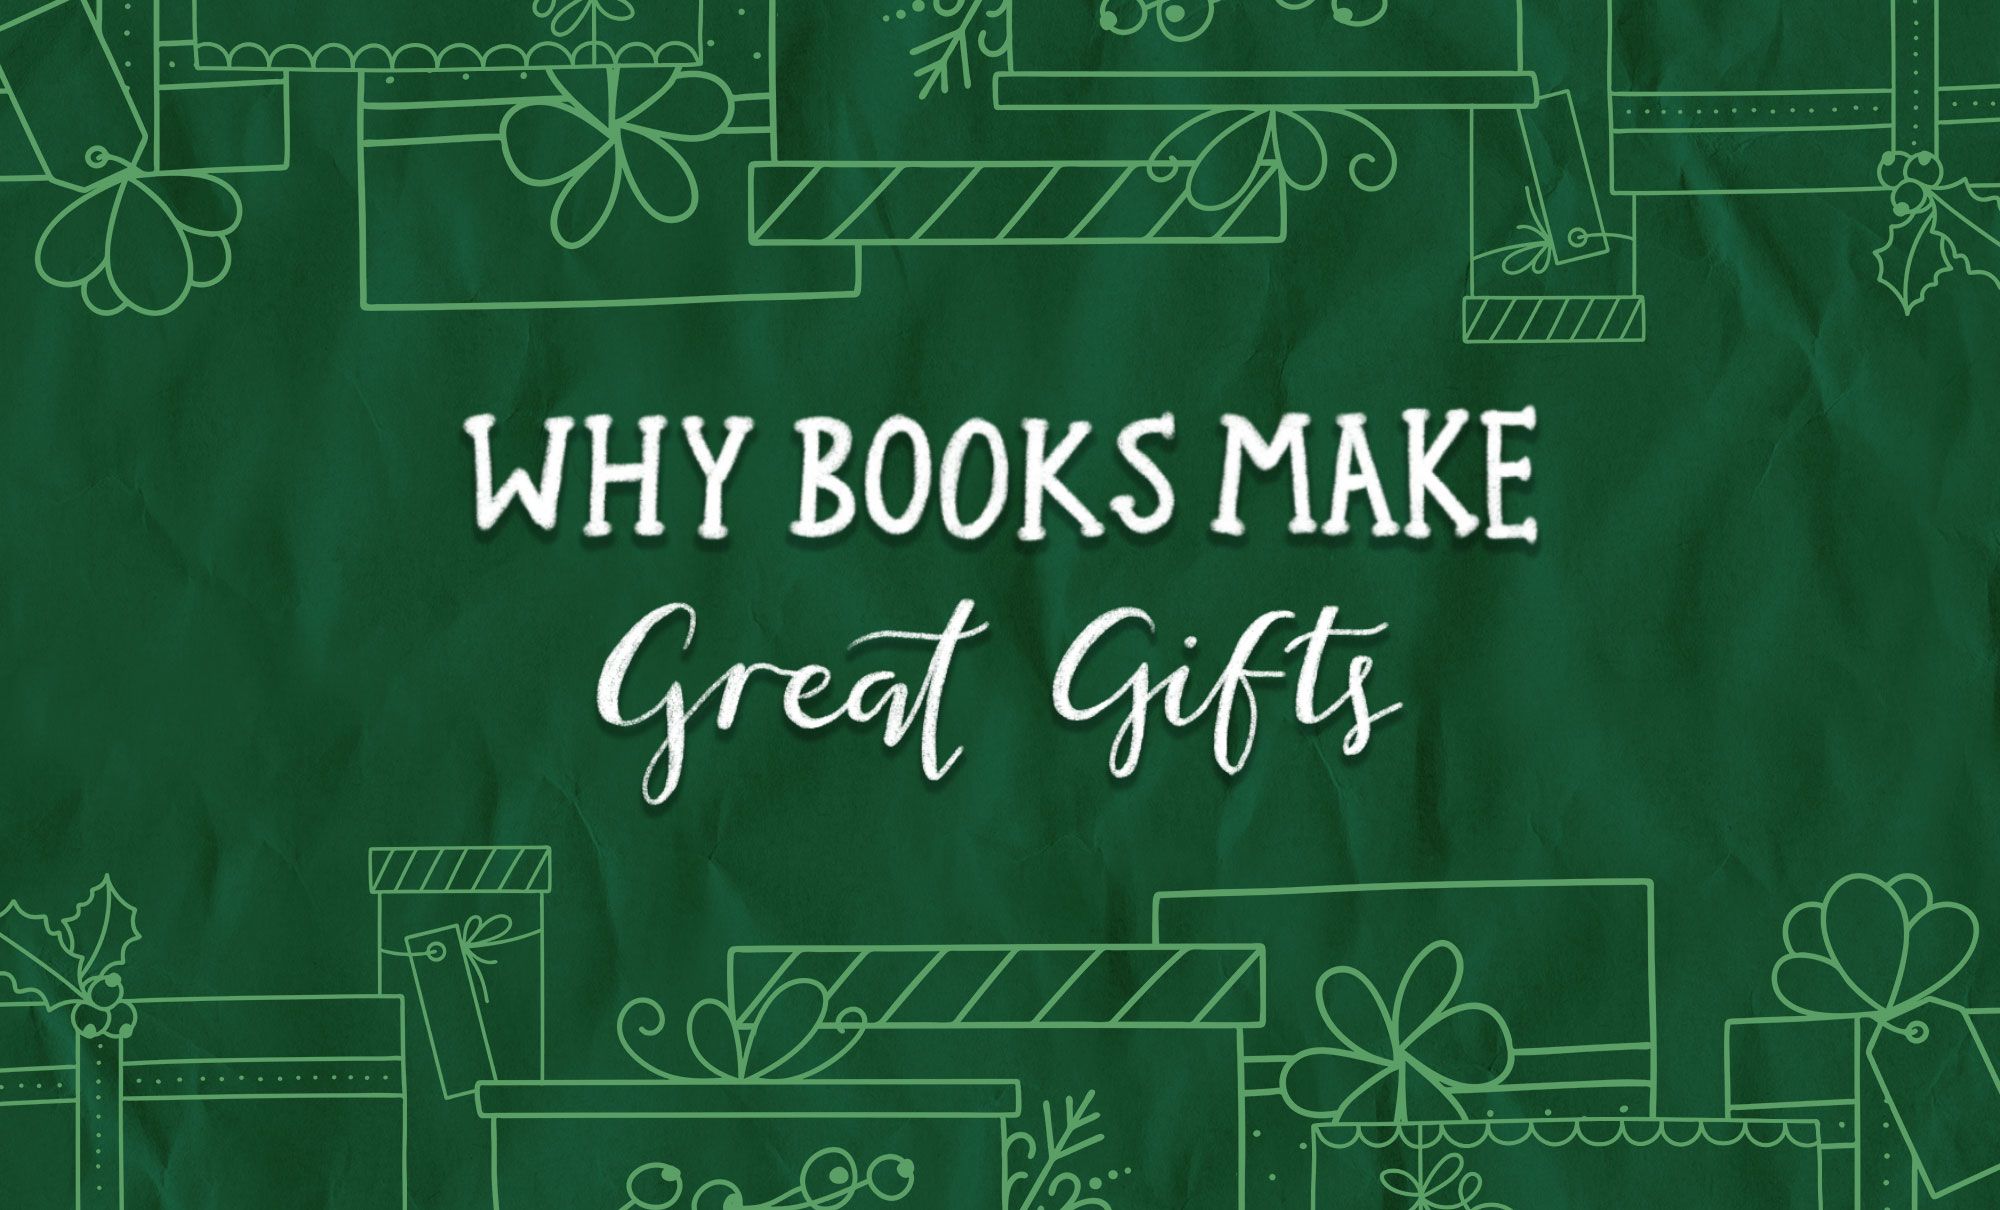 Why books make great gifts